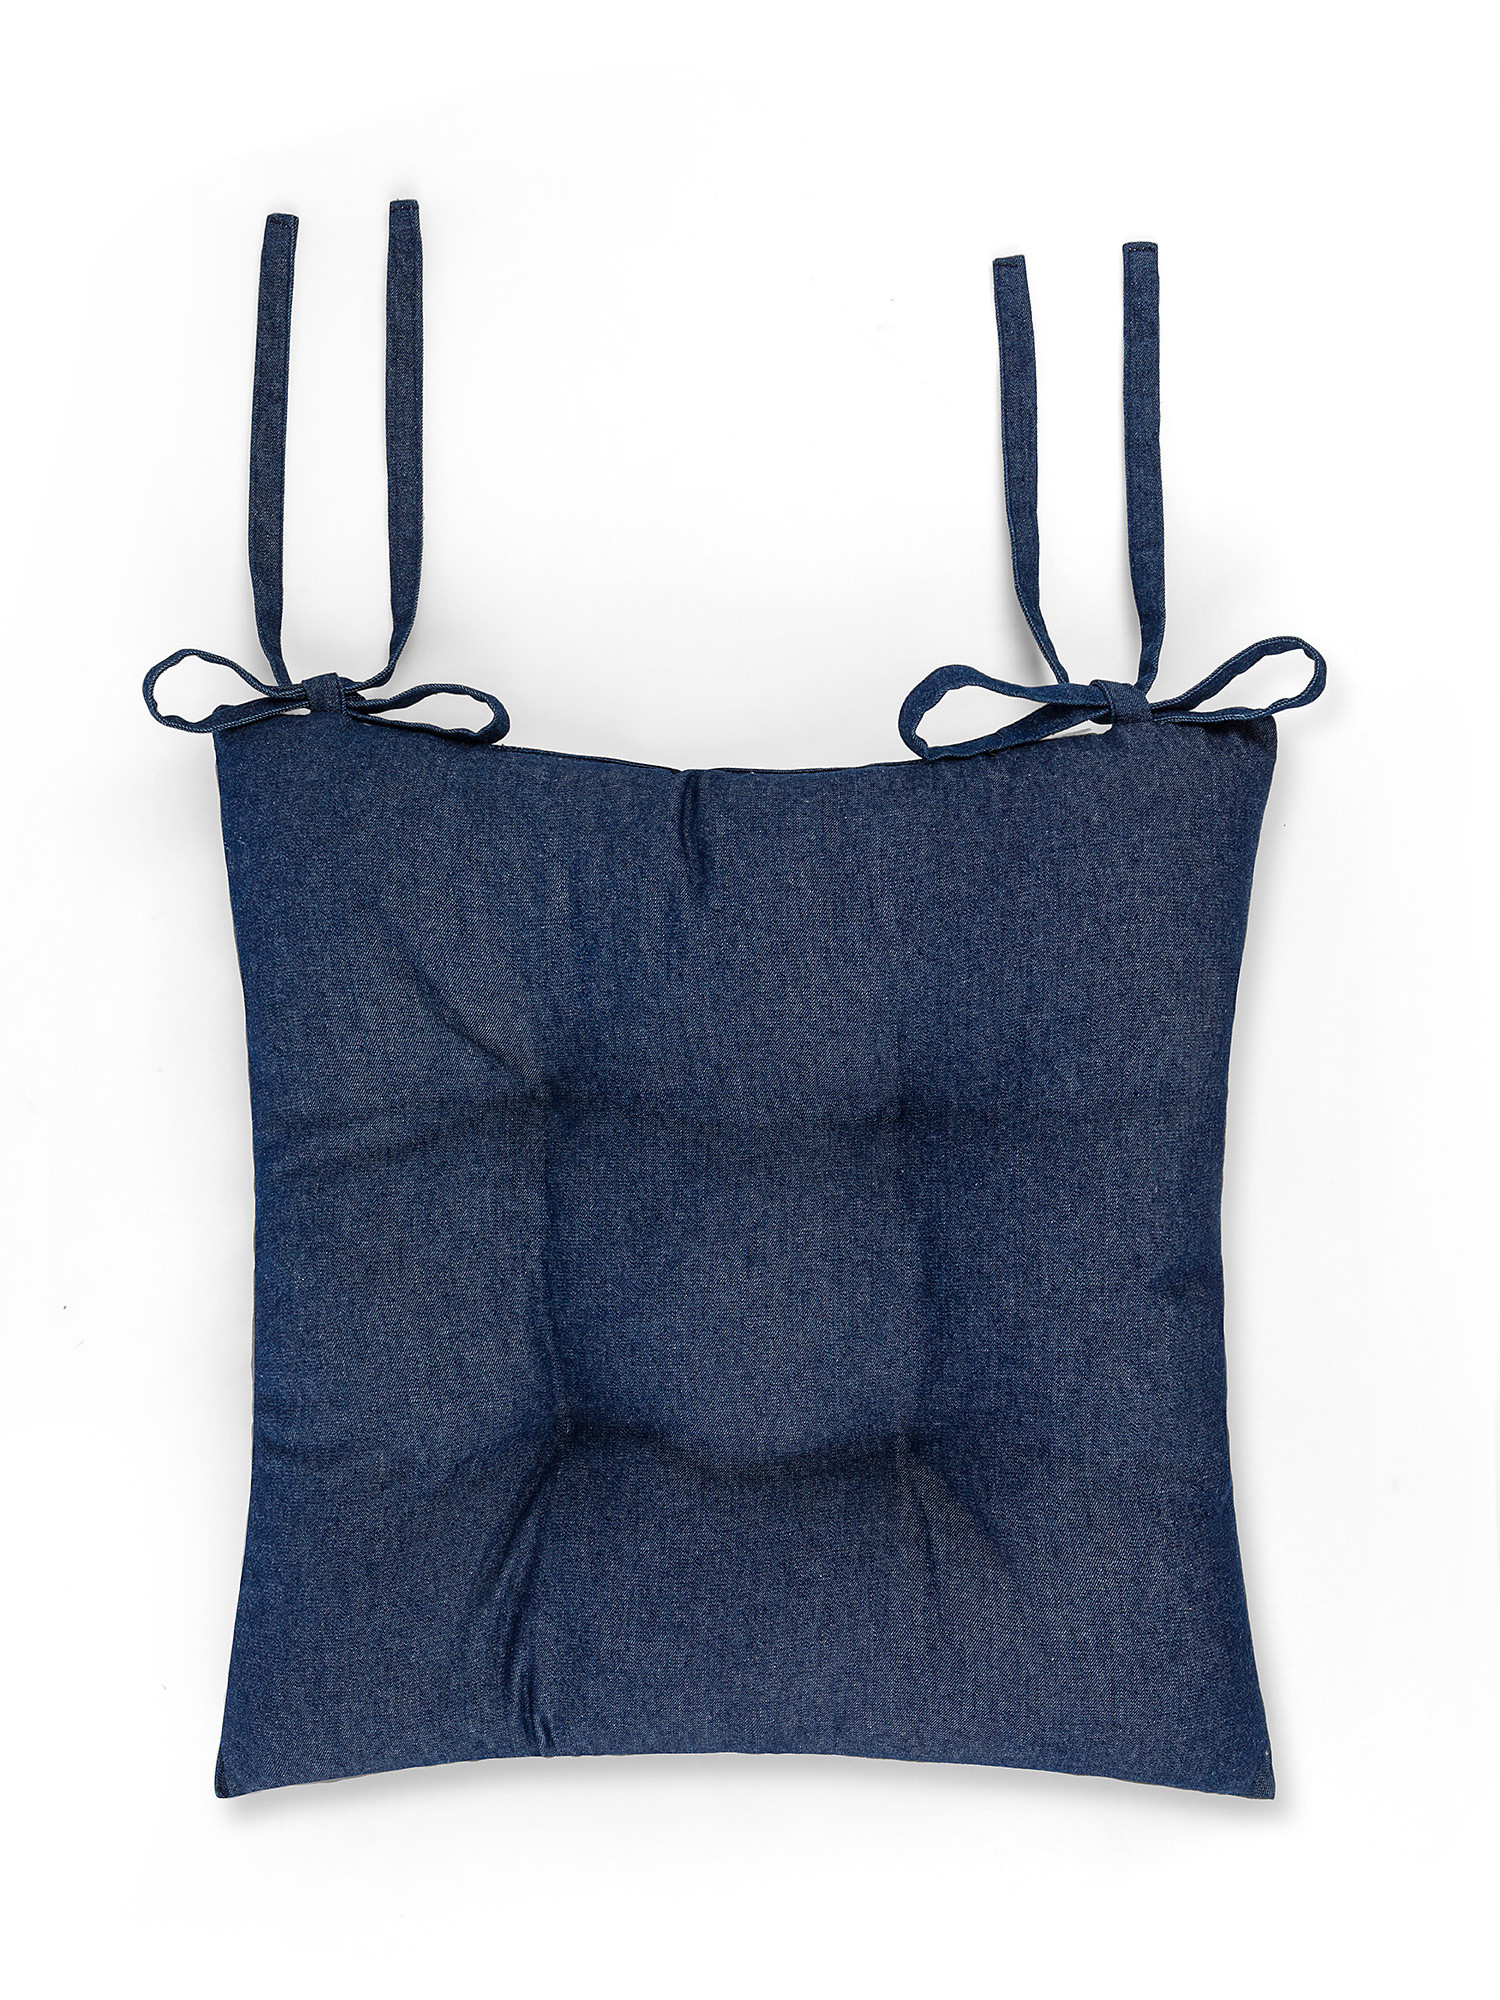 Chair cushion in cotton denim, Blue, large image number 0